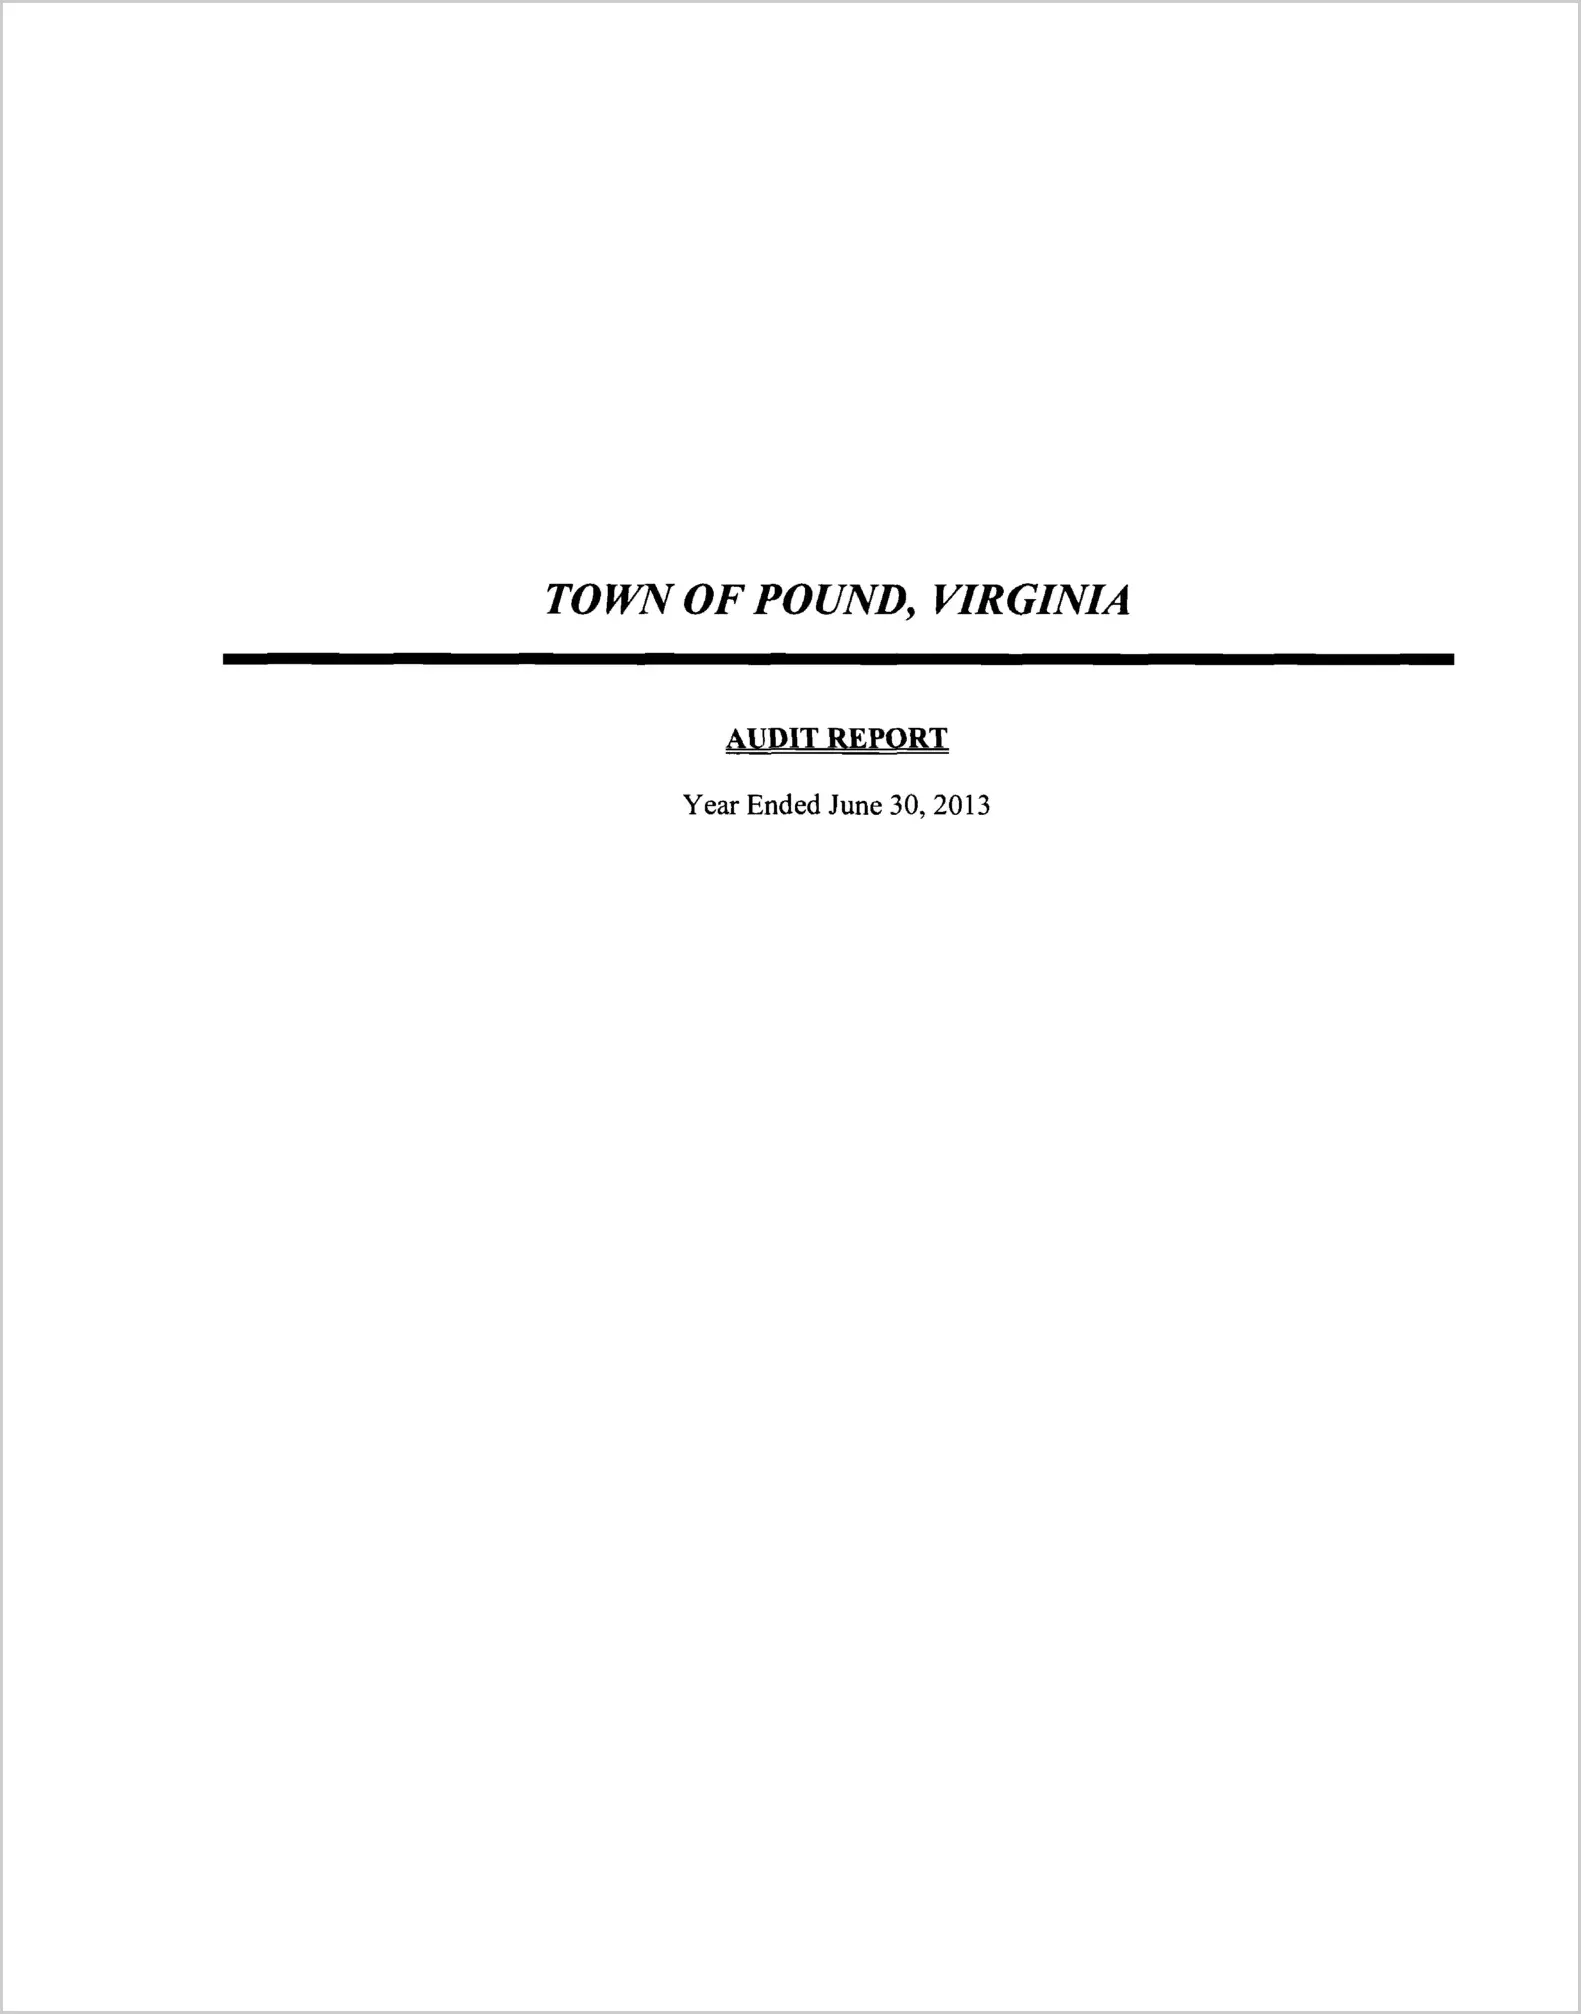 2013 Annual Financial Report for Town of Pound